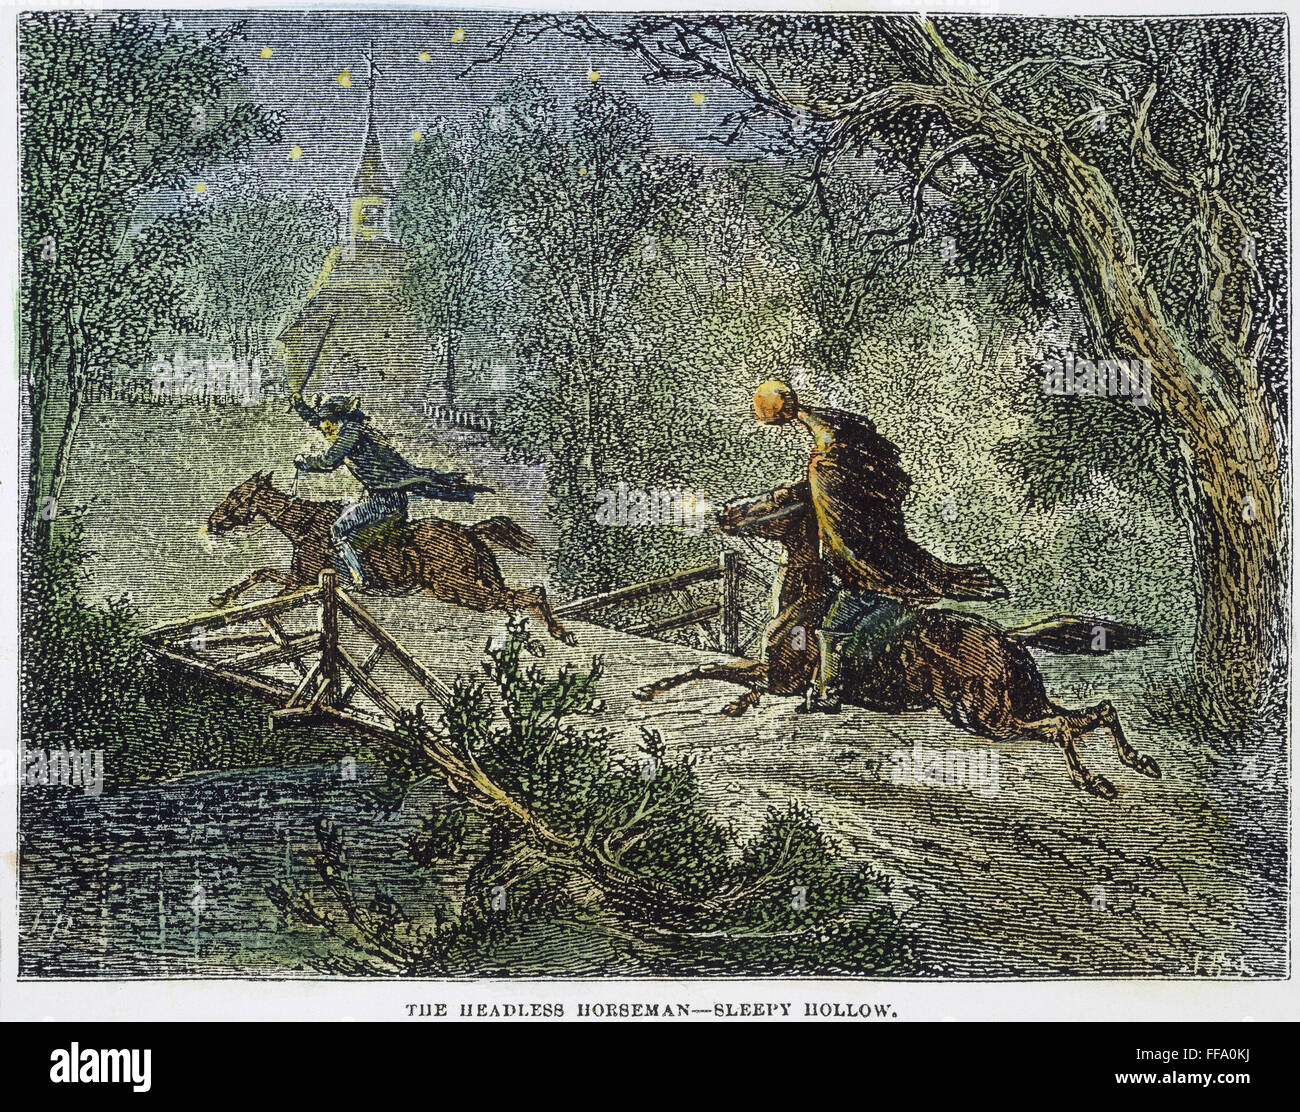 IRVING: SLEEPY HOLLOW. /nThe headless horseman scares Ichabod Crane out of town. Wood engraving, American, 1876, for Washington Irving's 'The Legend of Sleepy Hollow,' first published in 1819. Stock Photo